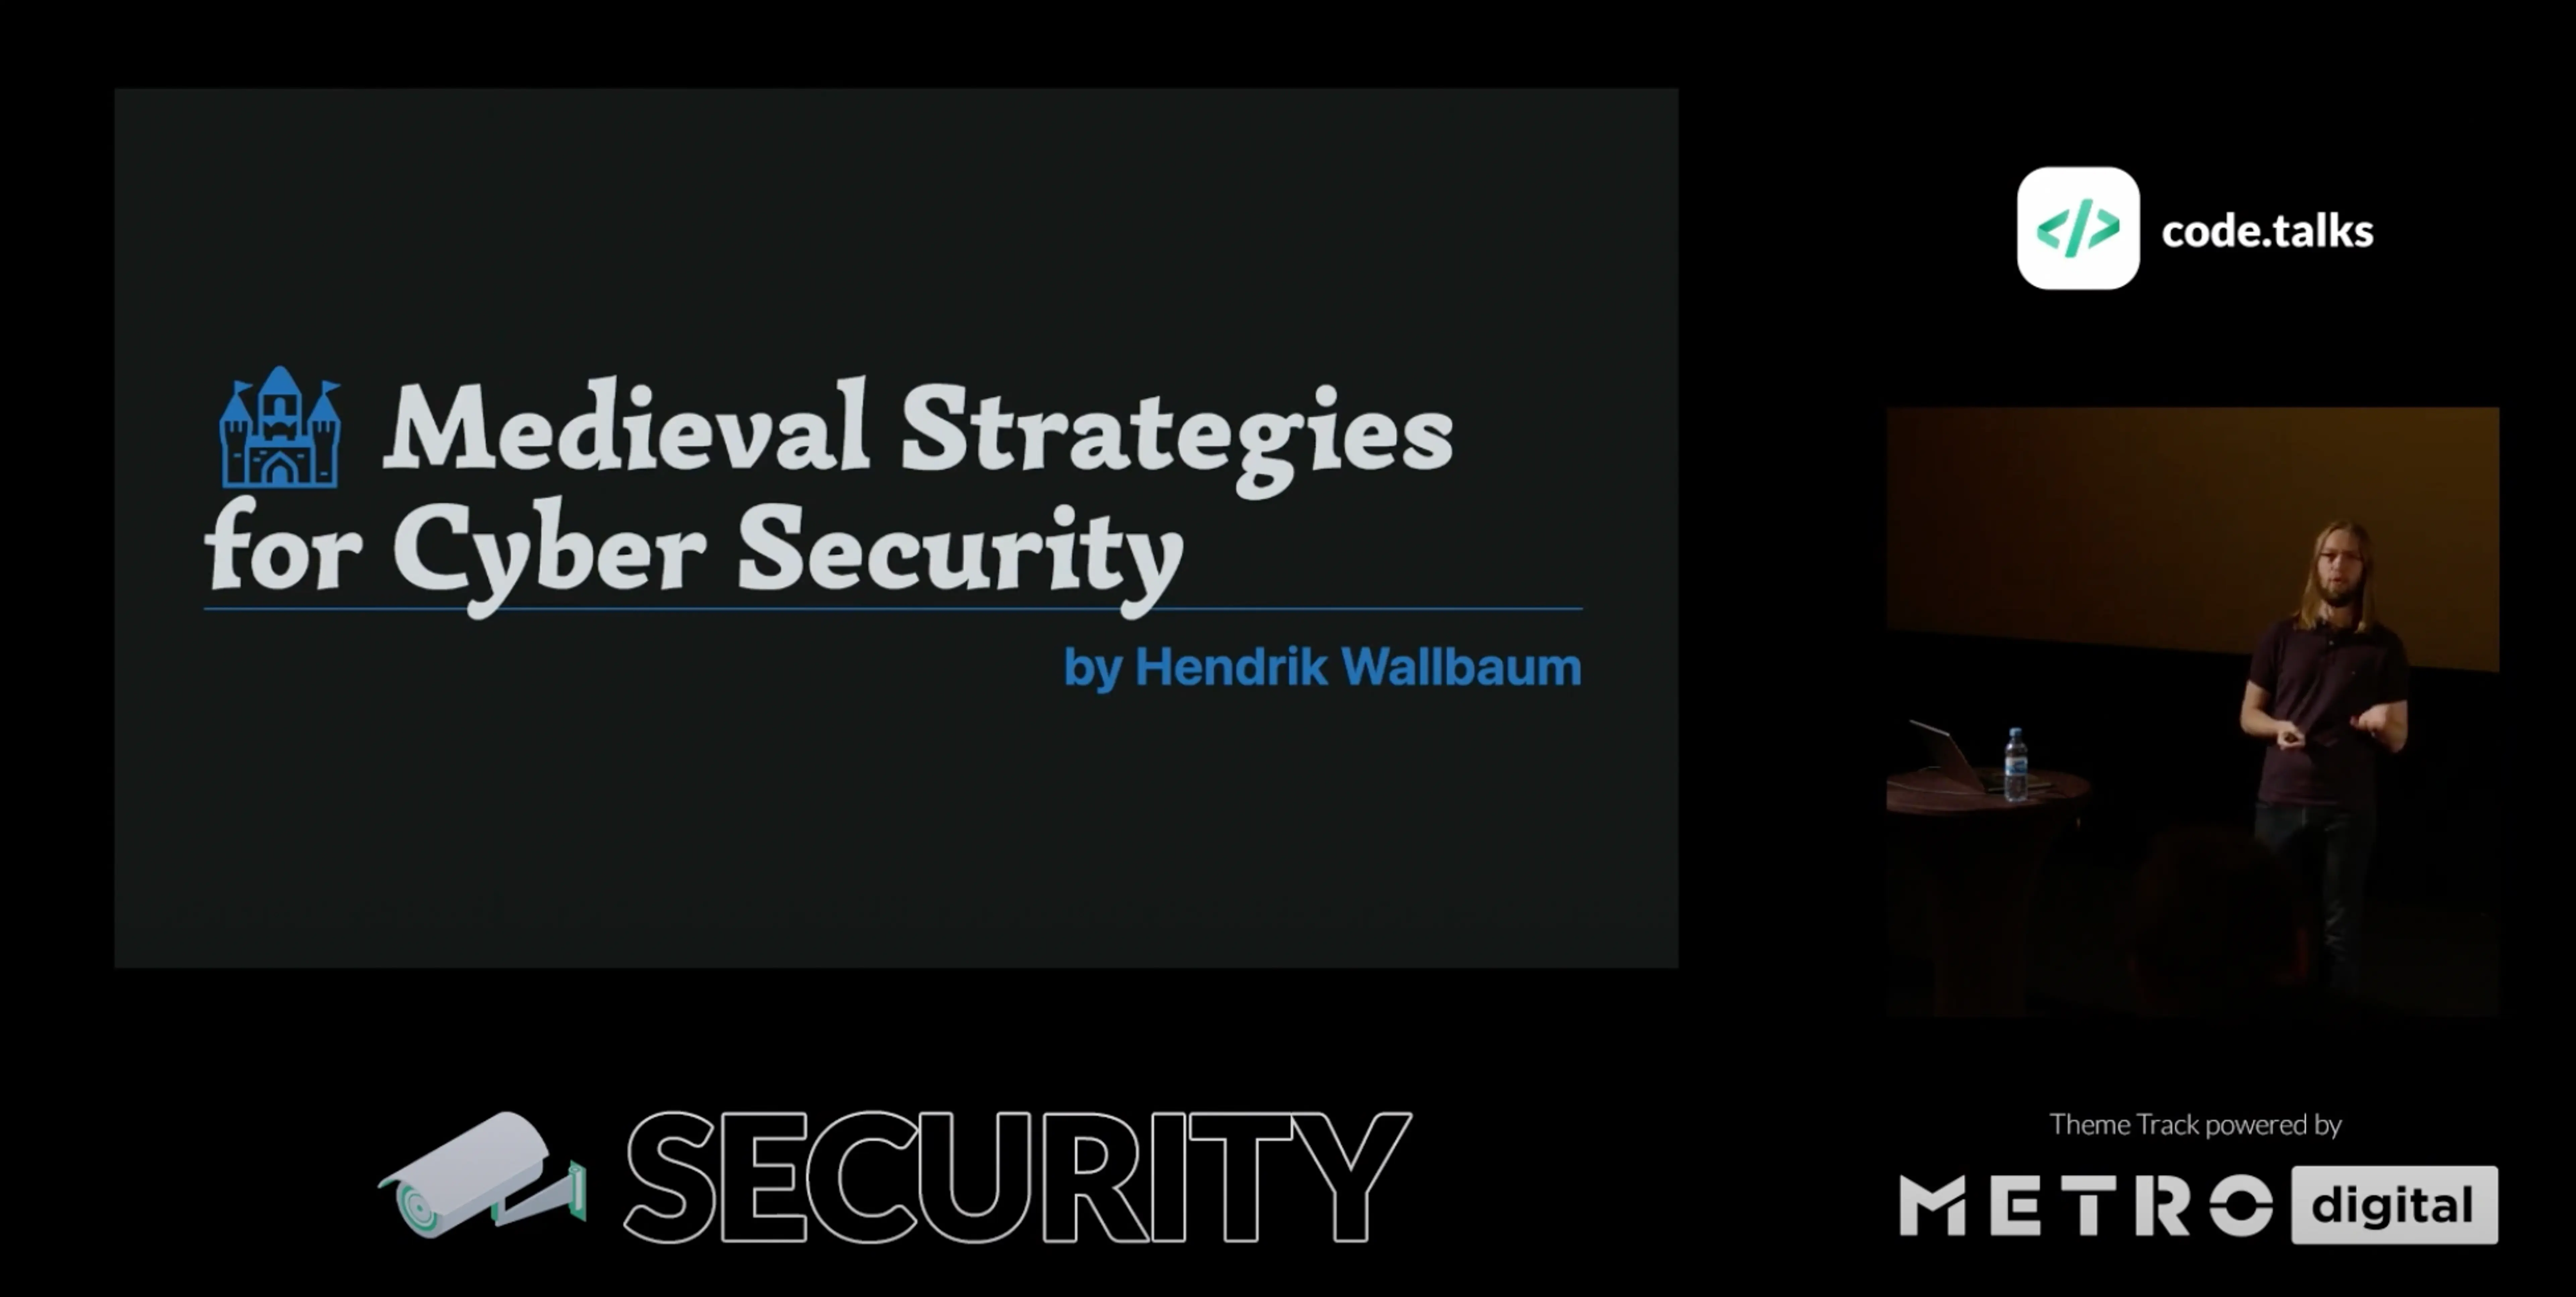 Medieval strategies for Cyber Security